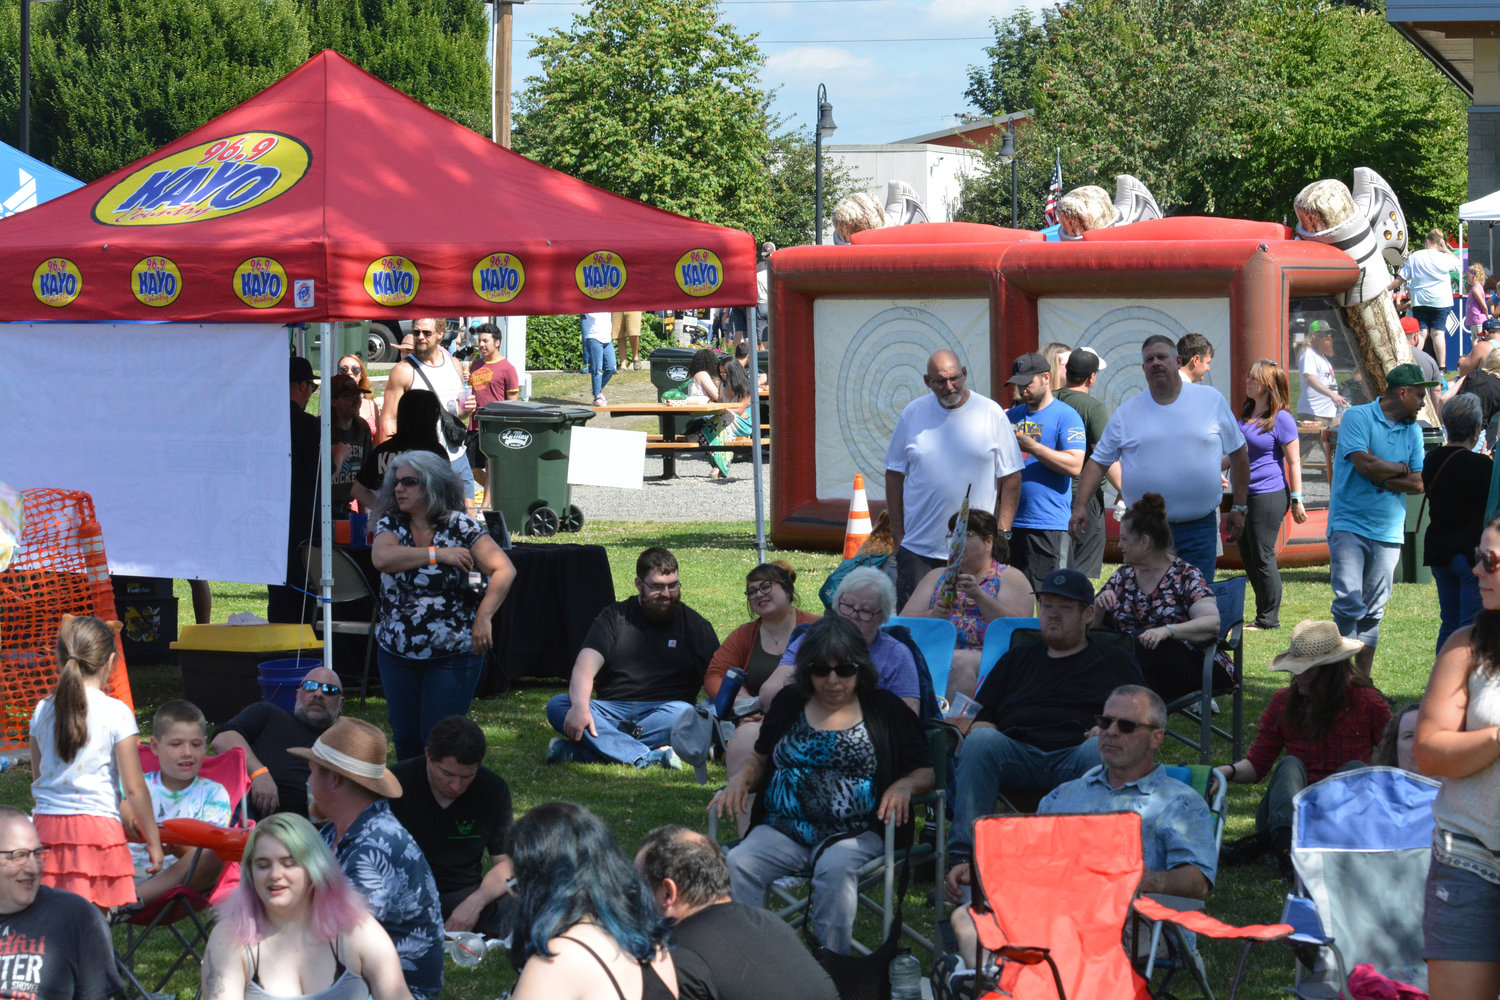 Many attendees of the Nisqually Valley Barbecue Rally on July 23 took to the shade while awards were announced.